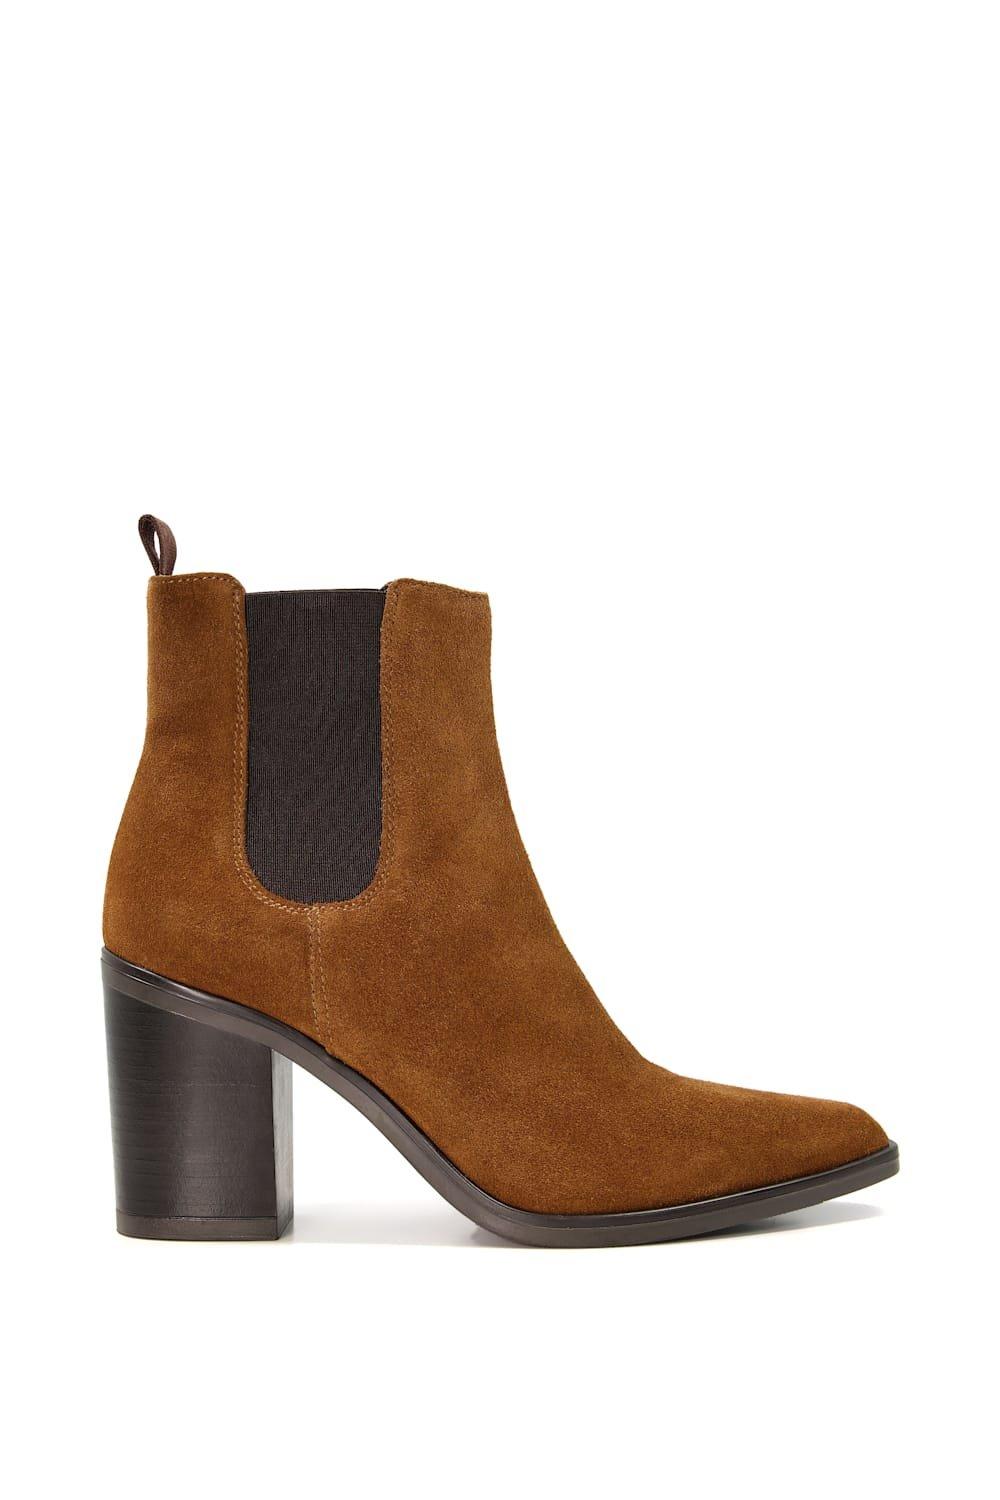 Boots | 'Prea' Suede Western Boots | Dune London